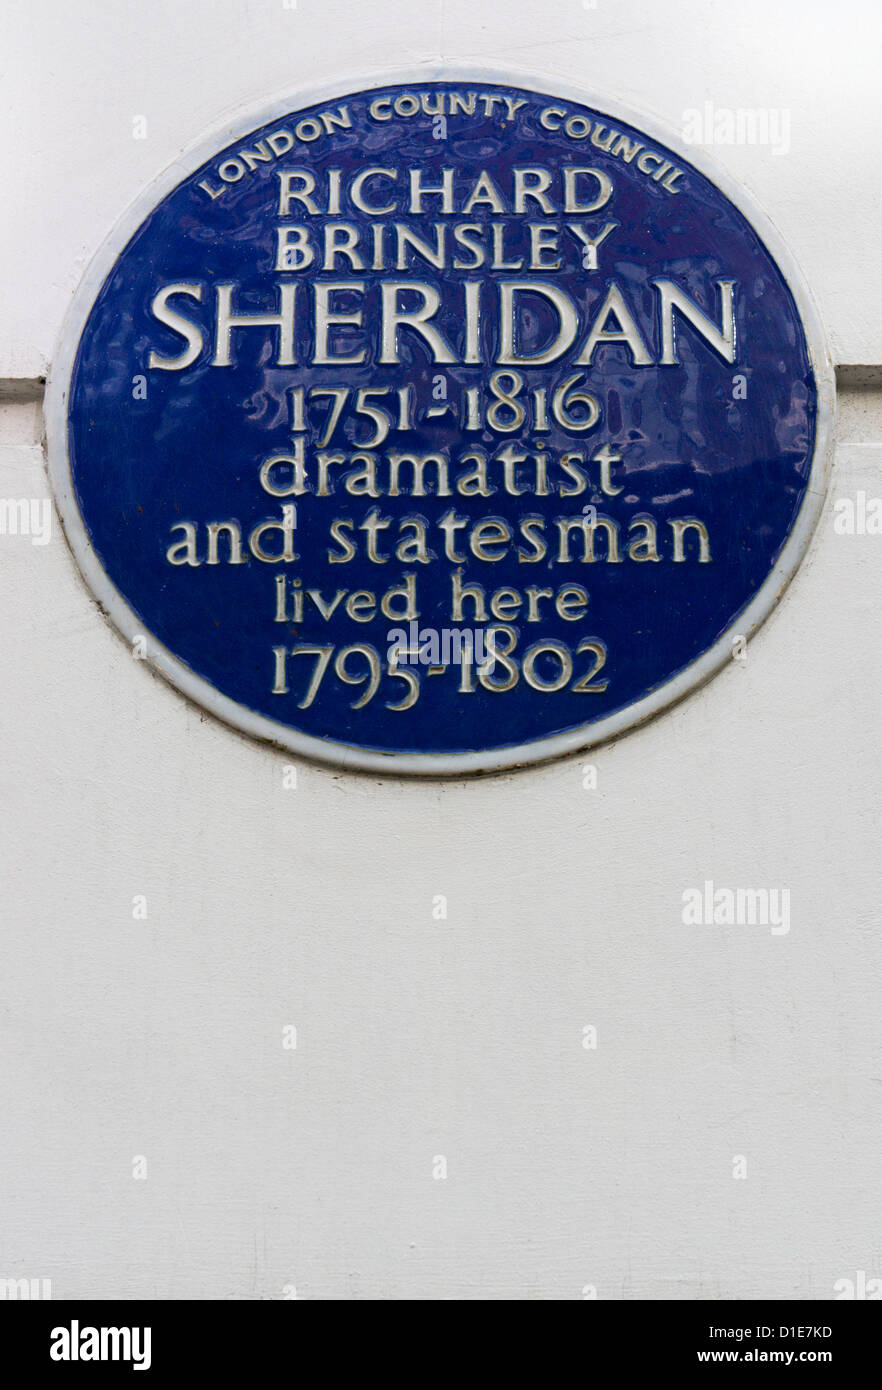 A blue plaque in London commemorating the dramatist and statesman Richard Brinsley Sheridan. Stock Photo